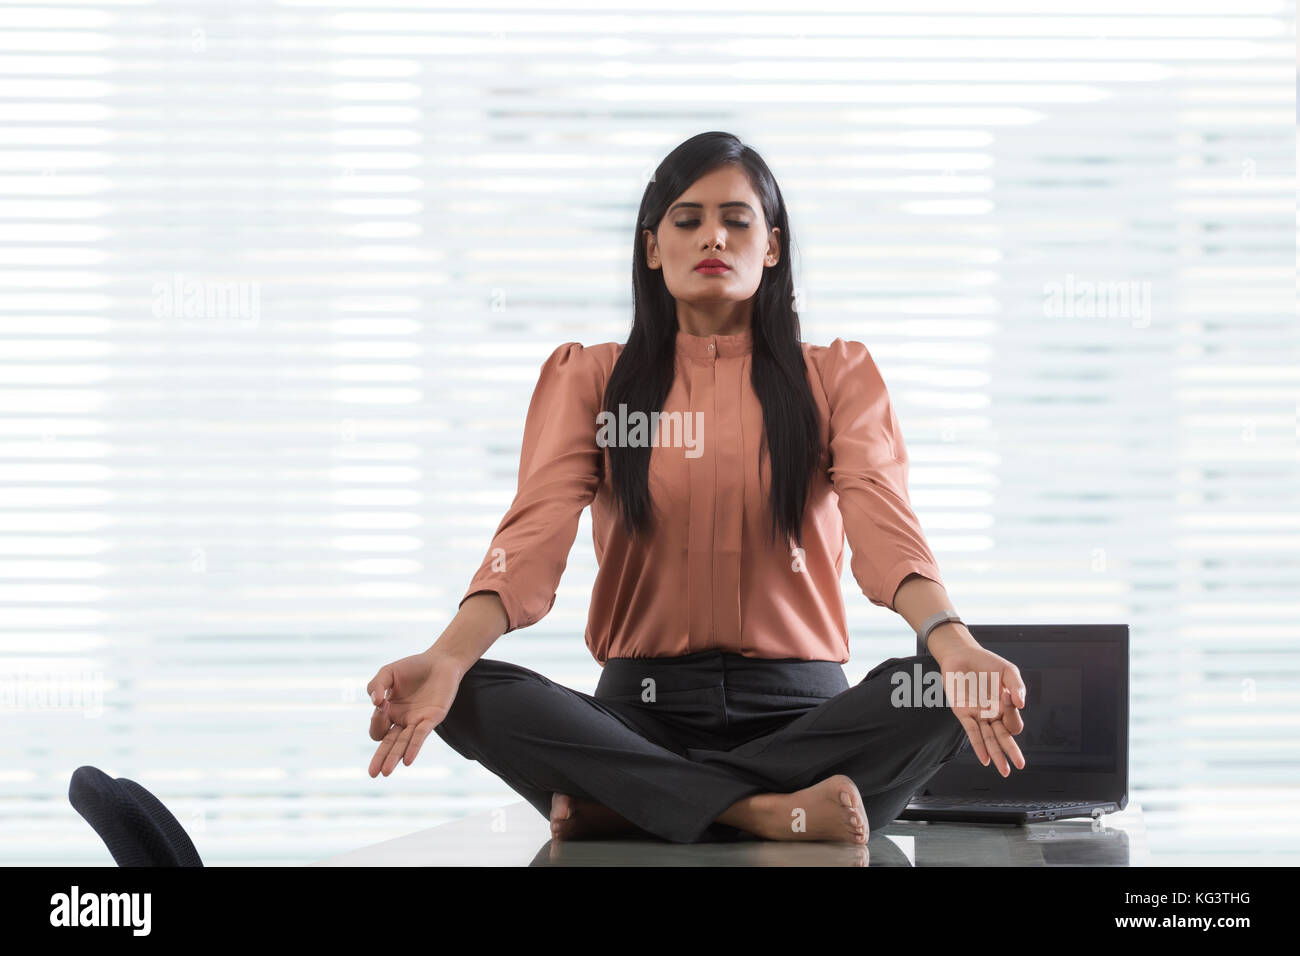 Young businesswoman sitting cross-legged doing yoga on desk in office Stock Photo